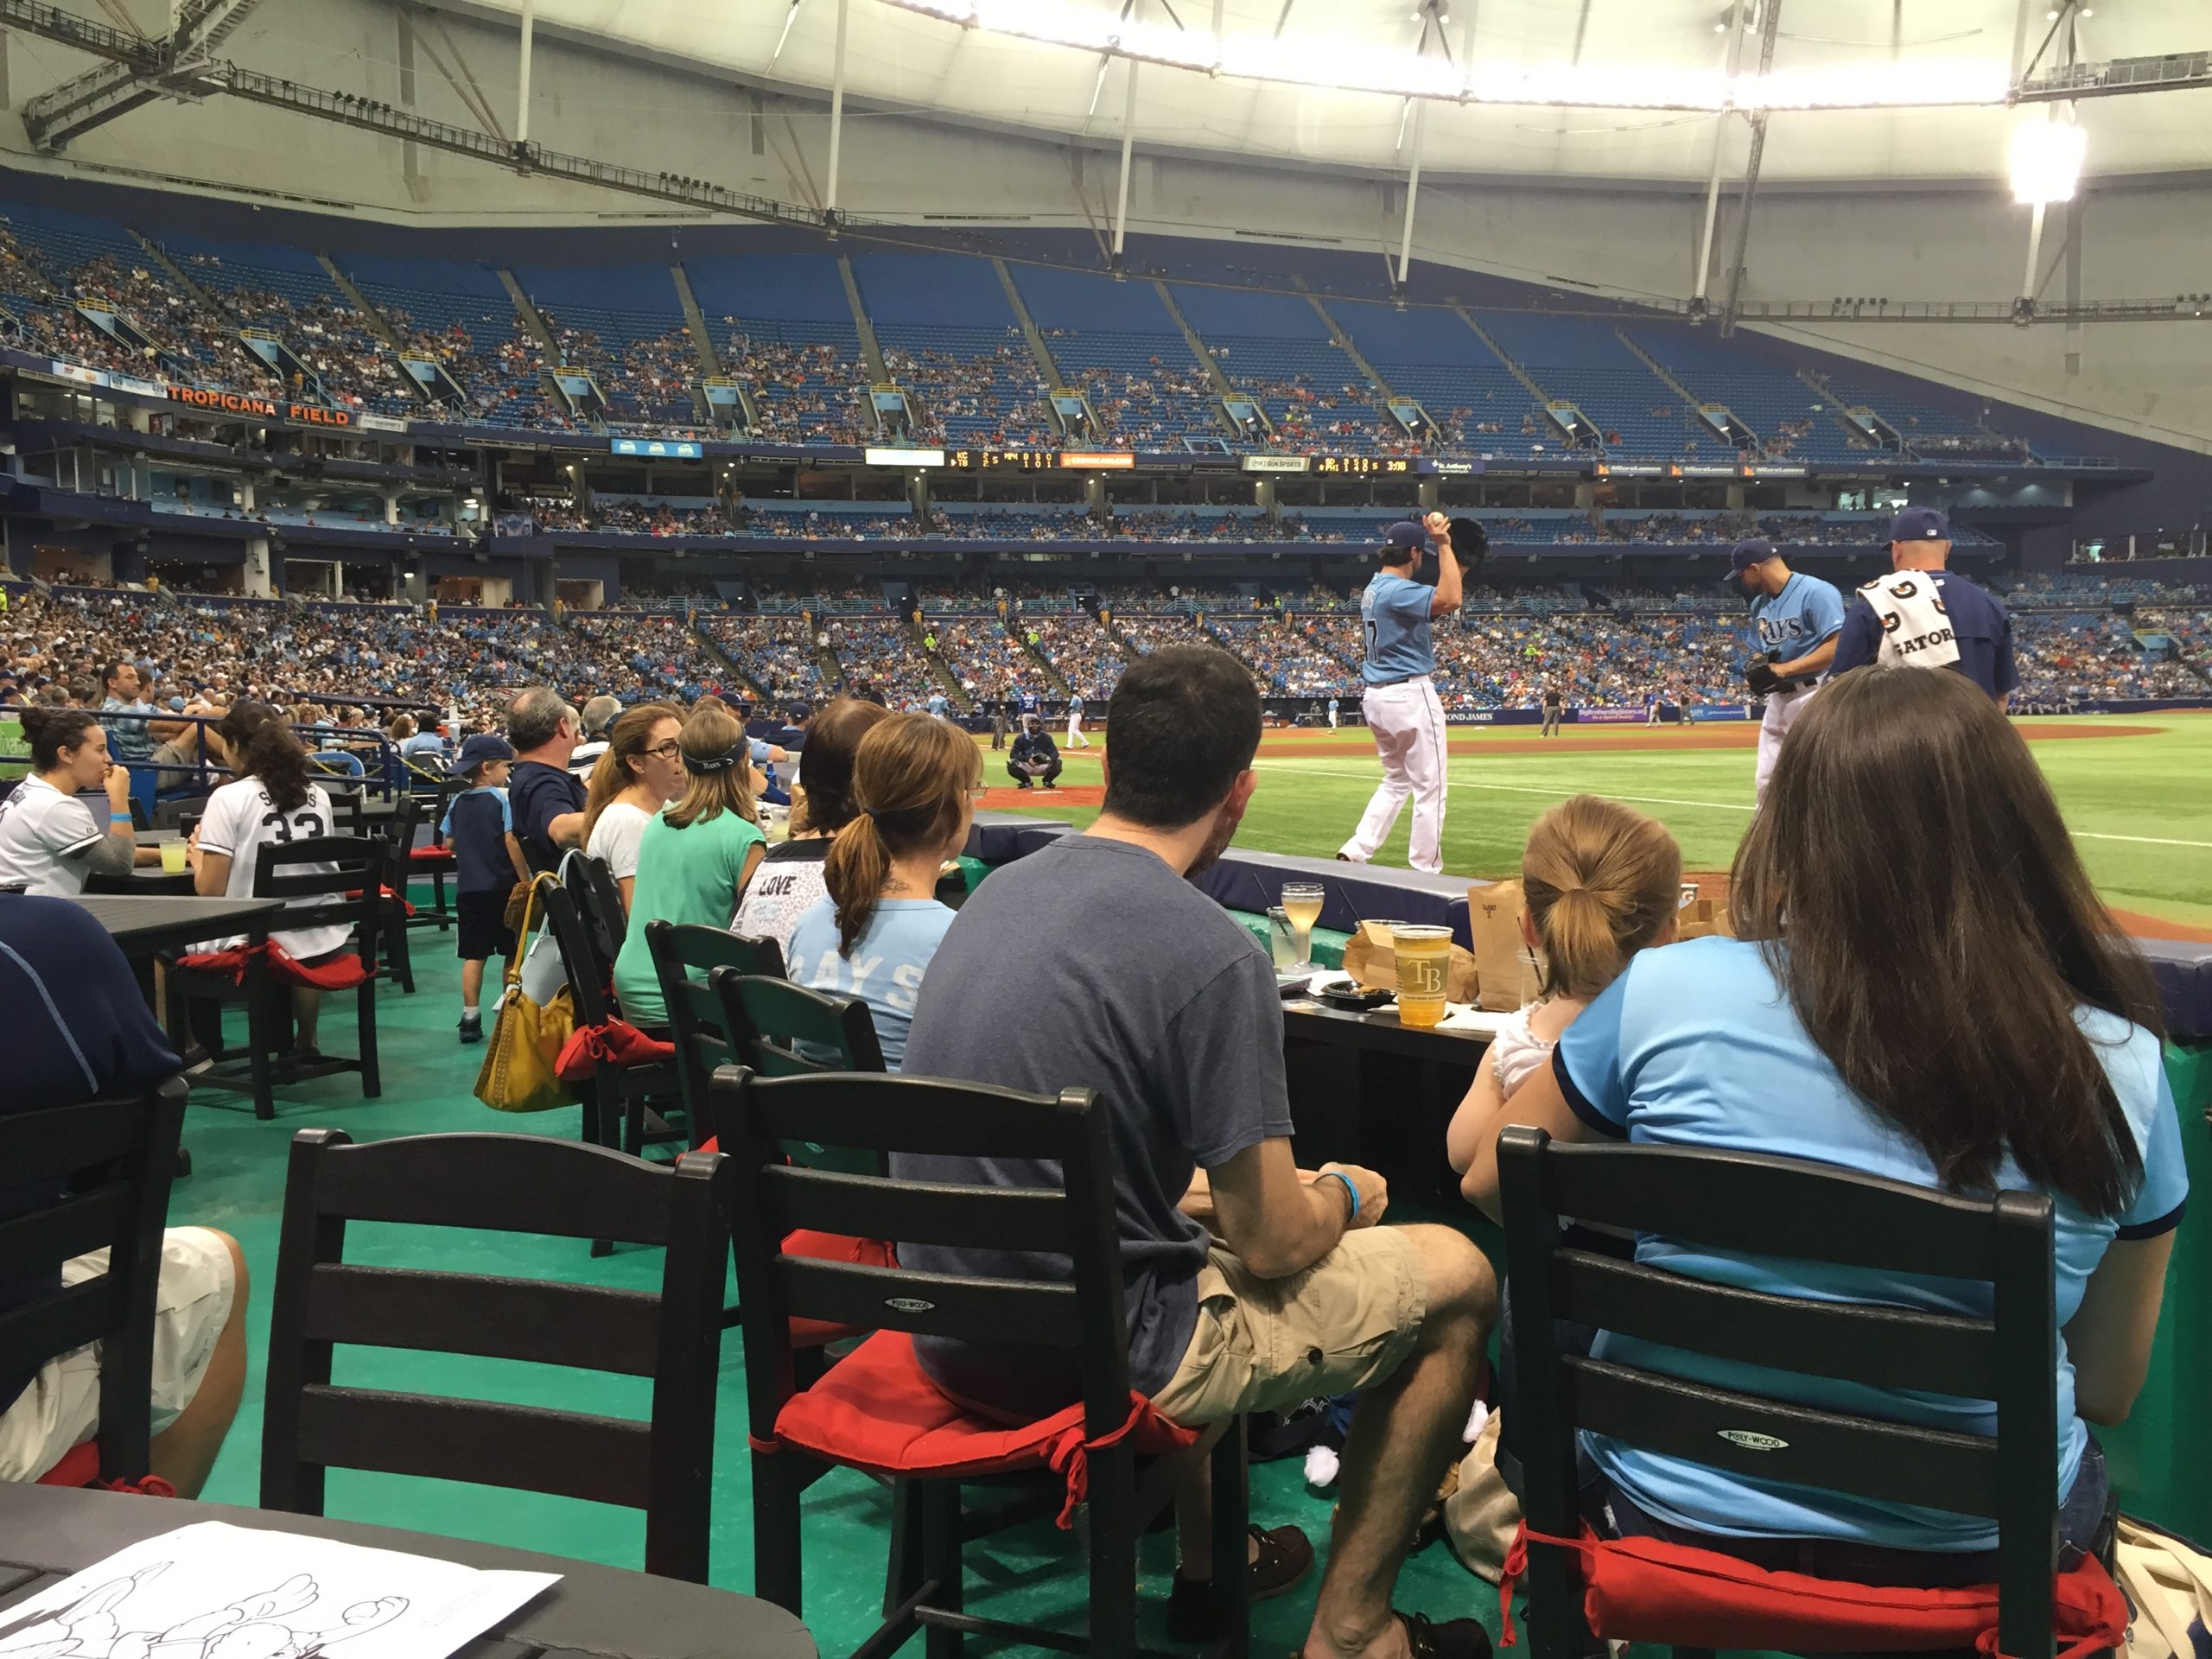 The James Hoyer whistleblower law firm take in a Tampa Bay Rays game.